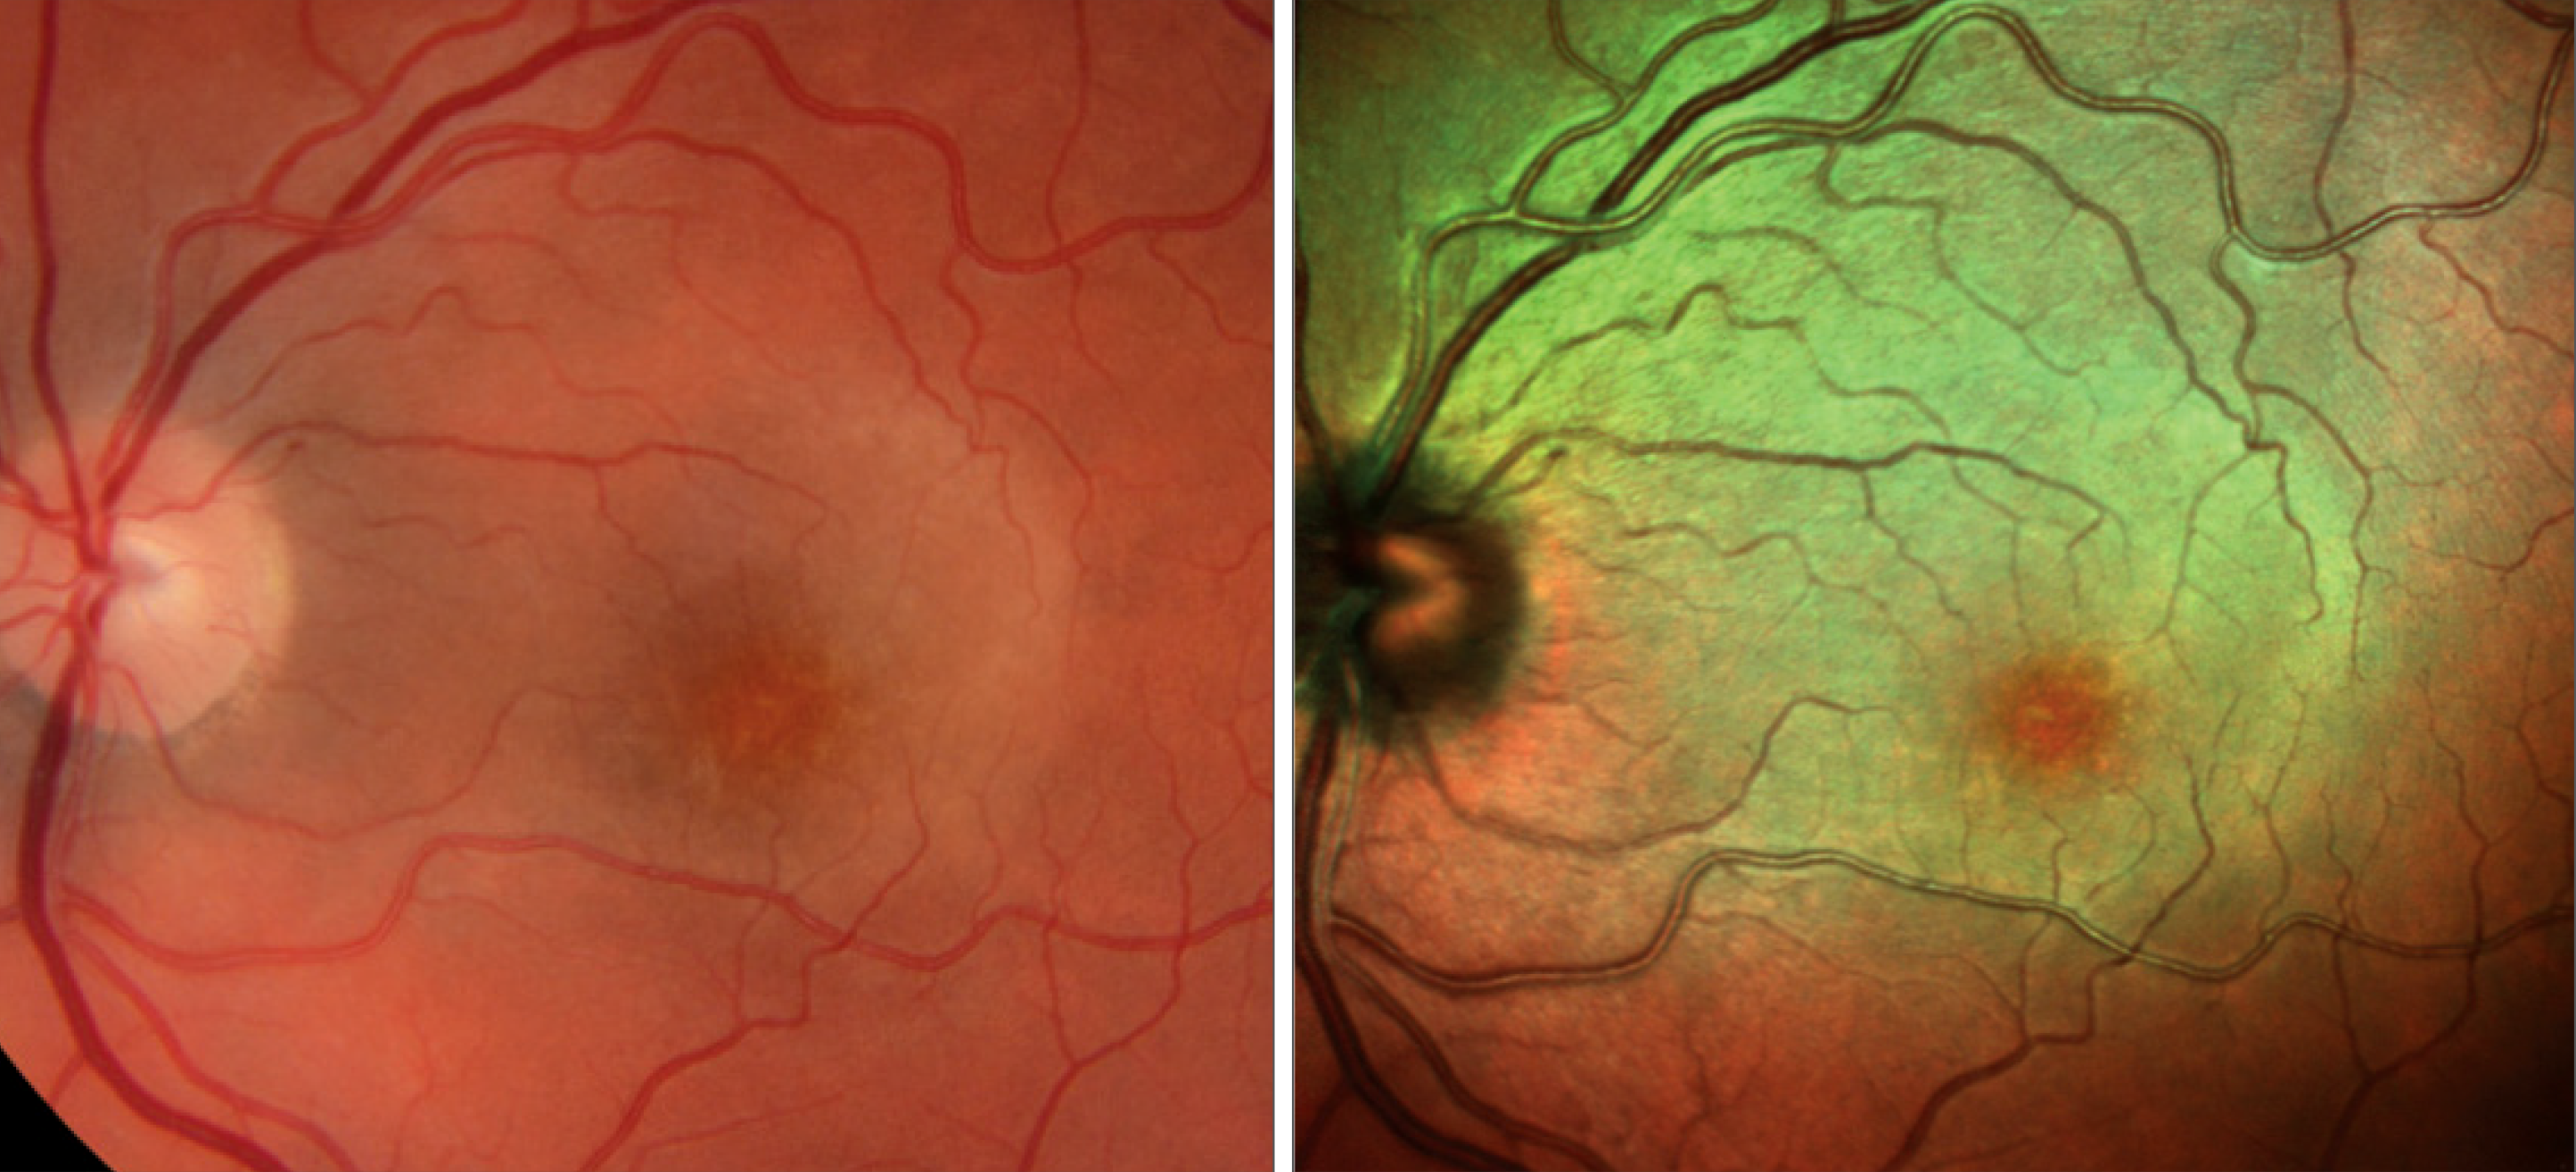 When presented with cases of intraocular inflammation, clinicians should have an elevated level of suspicion for syphilitic uveitis in patients meeting certain profile characteristics described here, as it is commonly missed on initial diagnosis. 